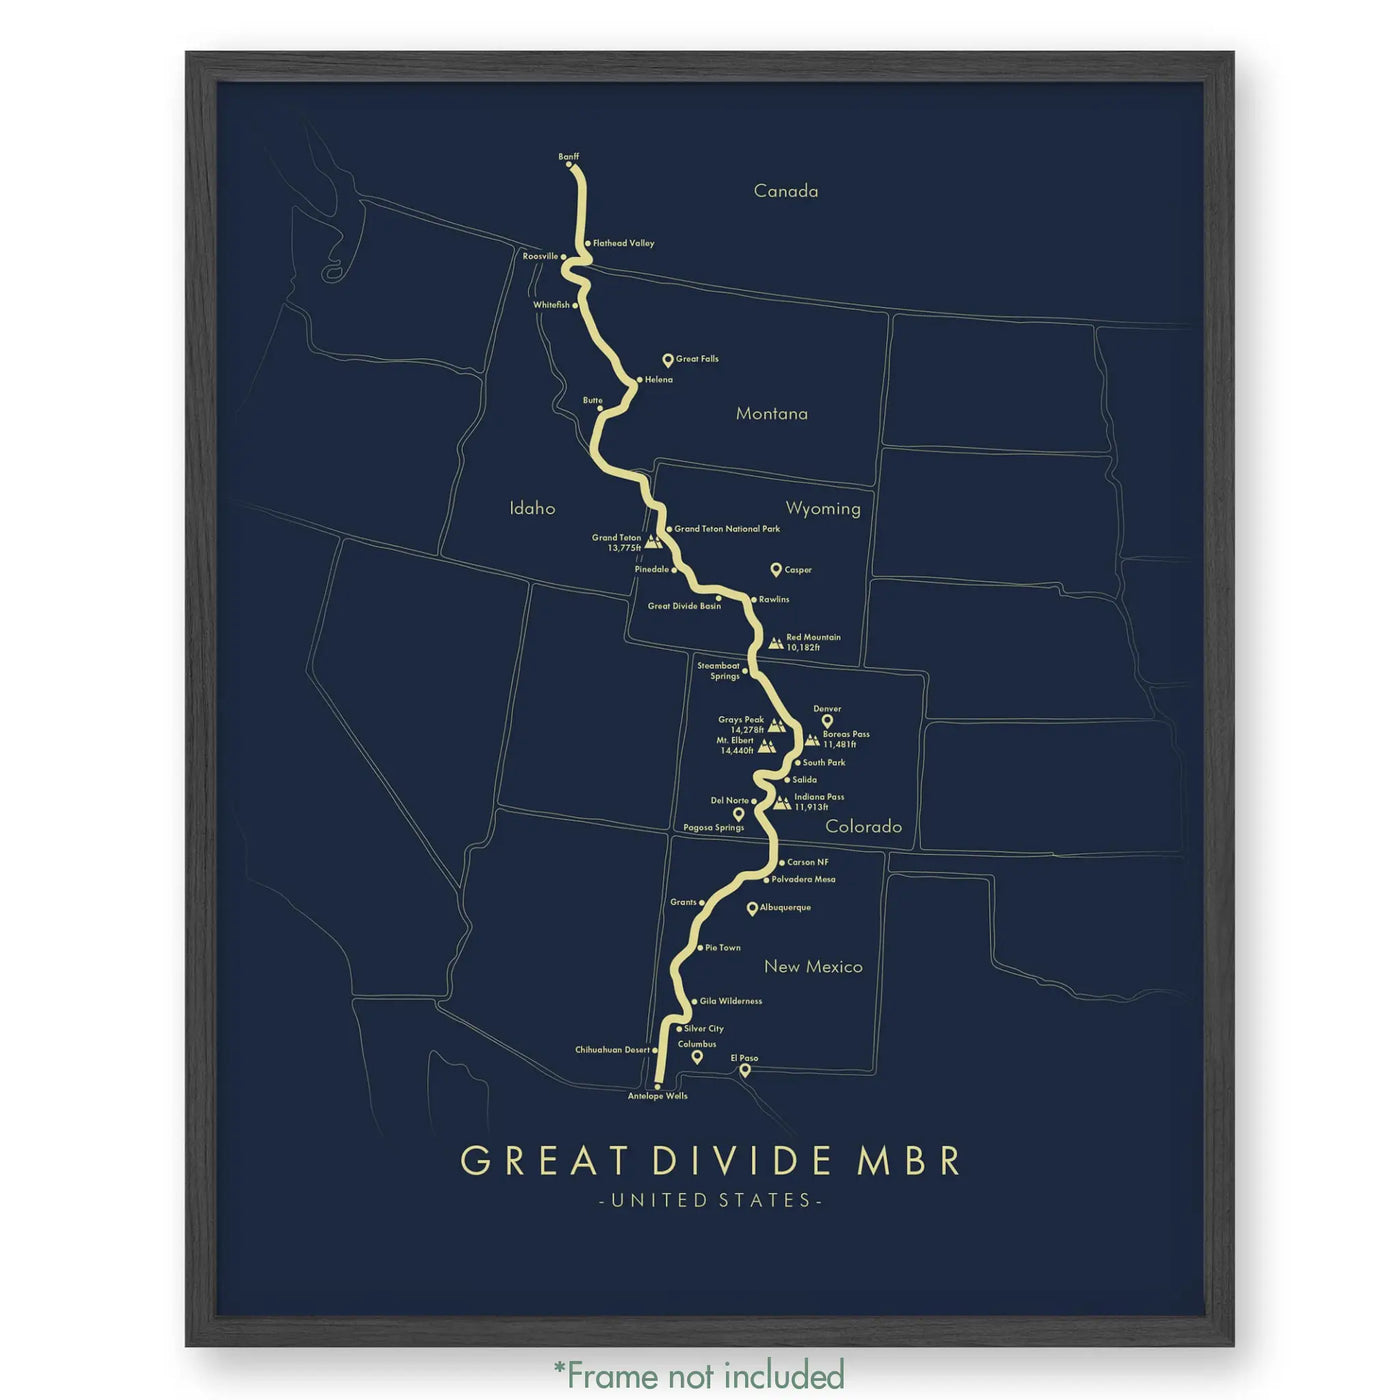 Trail Poster of Great Divide MTB - Blue